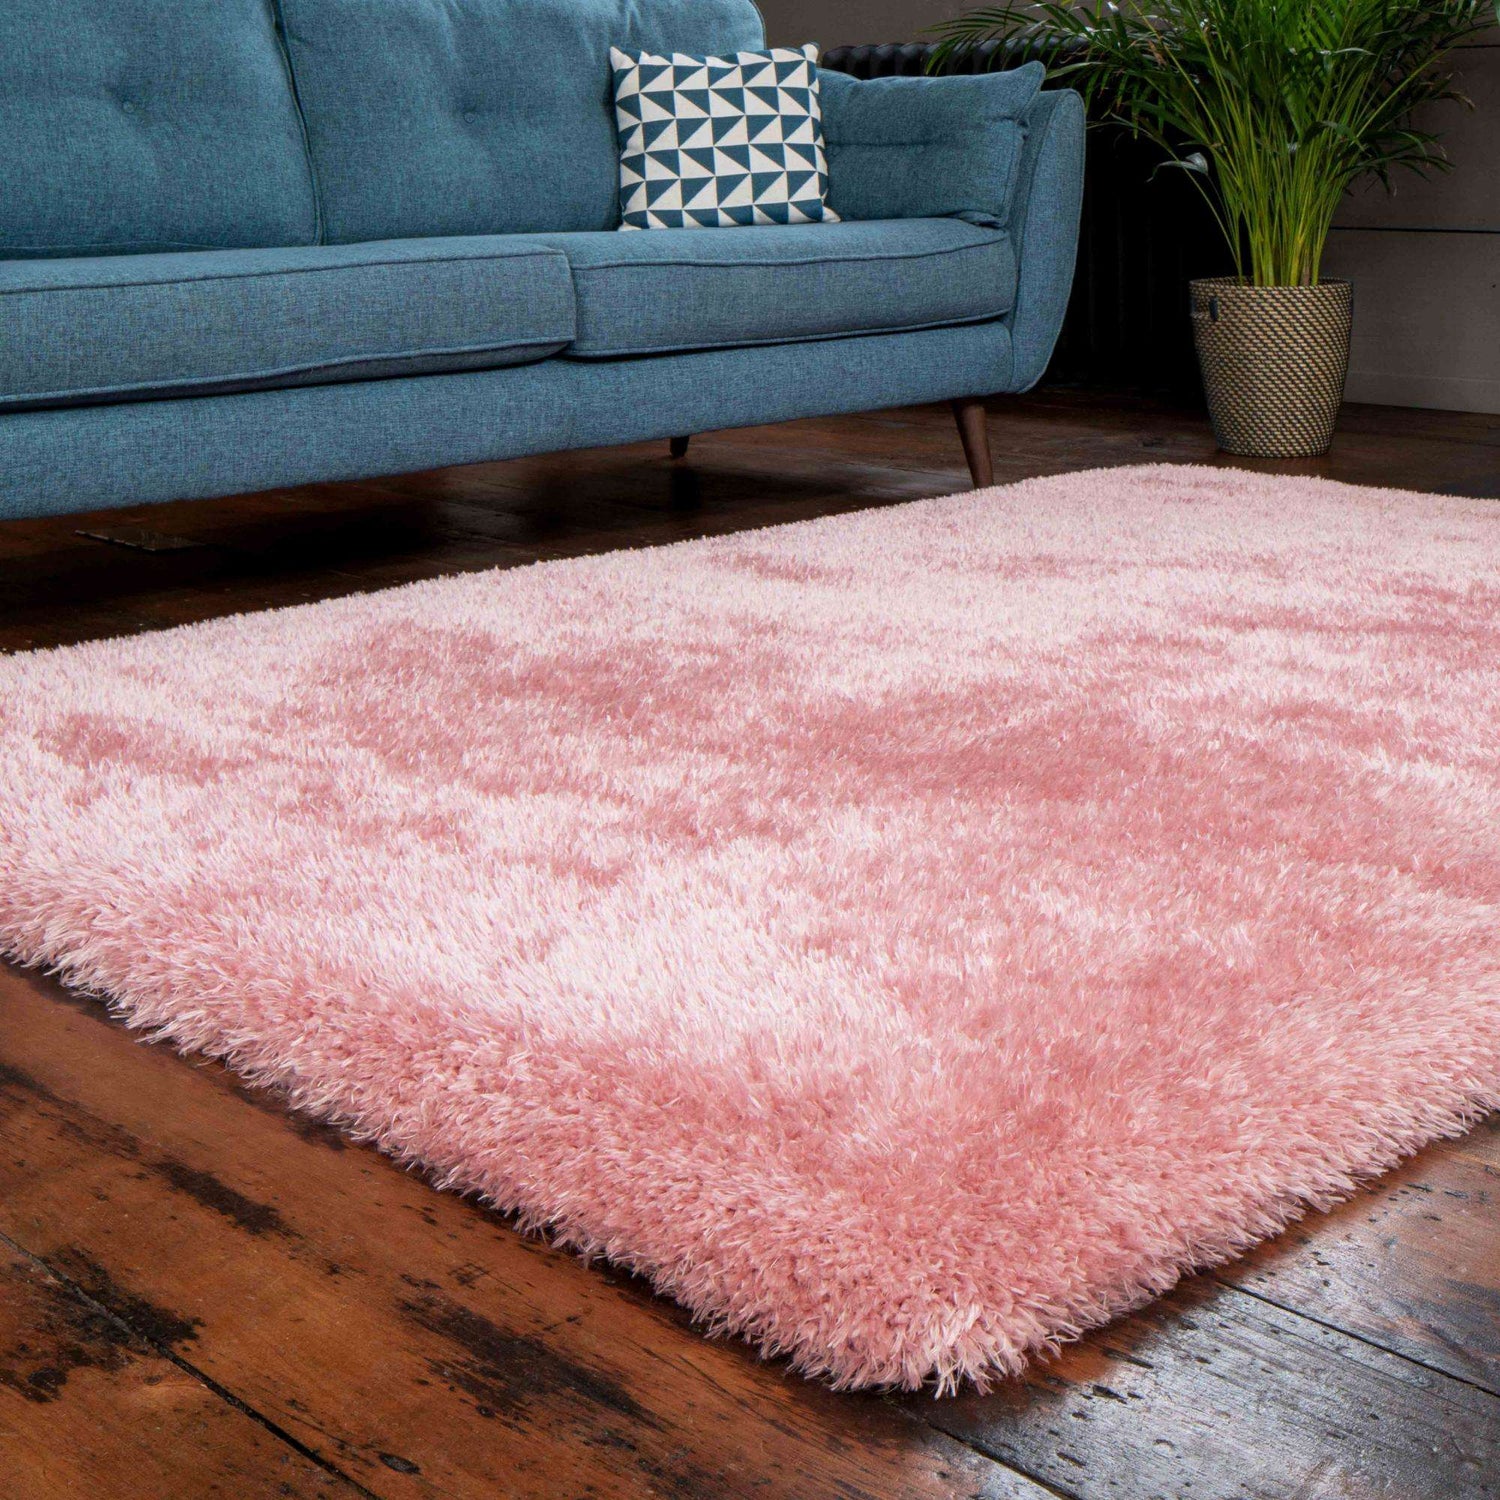 Deluxe Thick Soft Blush Pink Shaggy Bedroom Rug